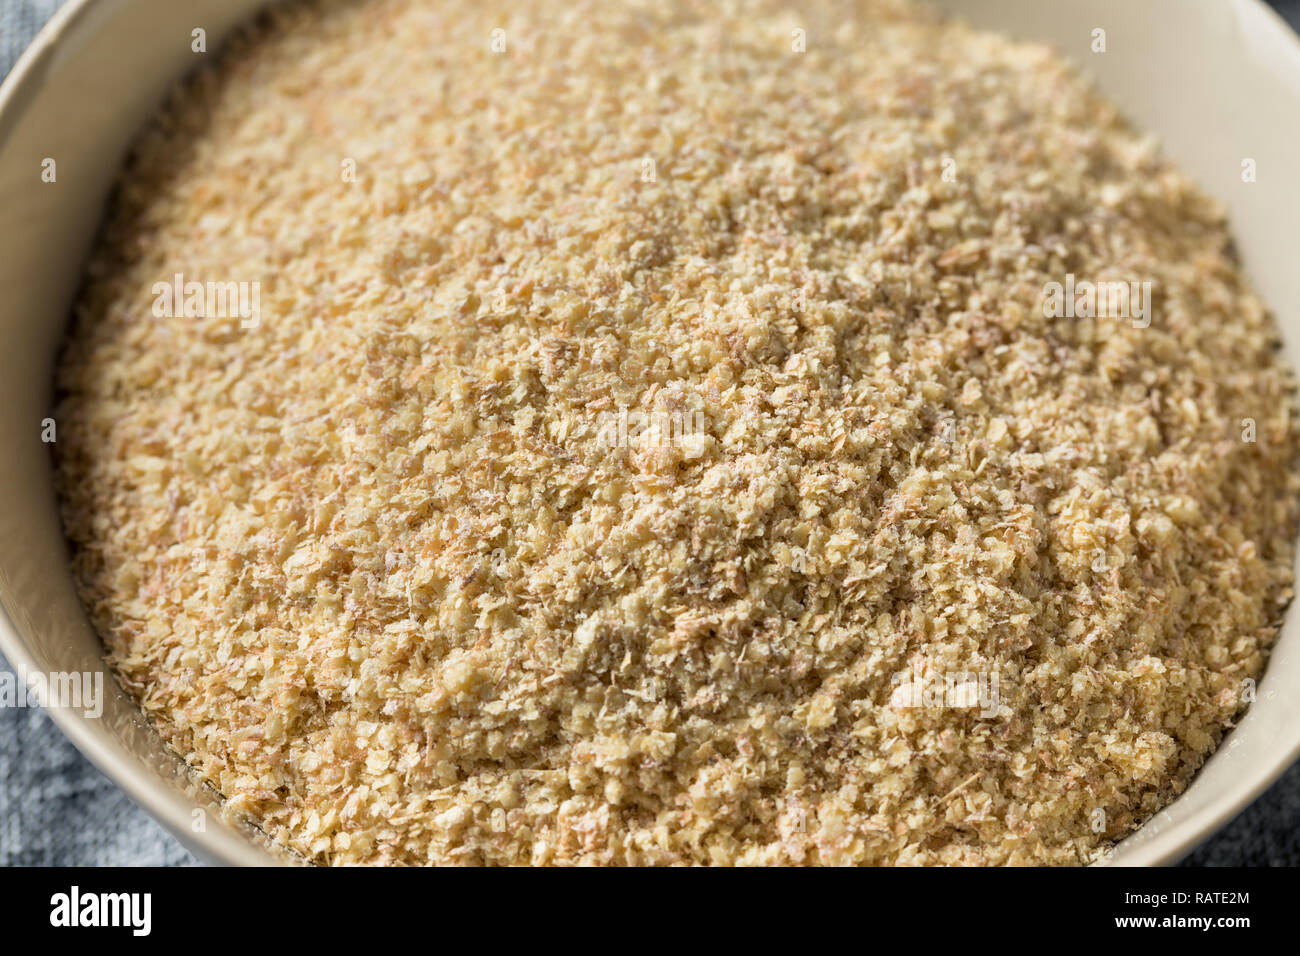 Dry Organic Wheat Germ Flour Ready to Cook With Stock Photo